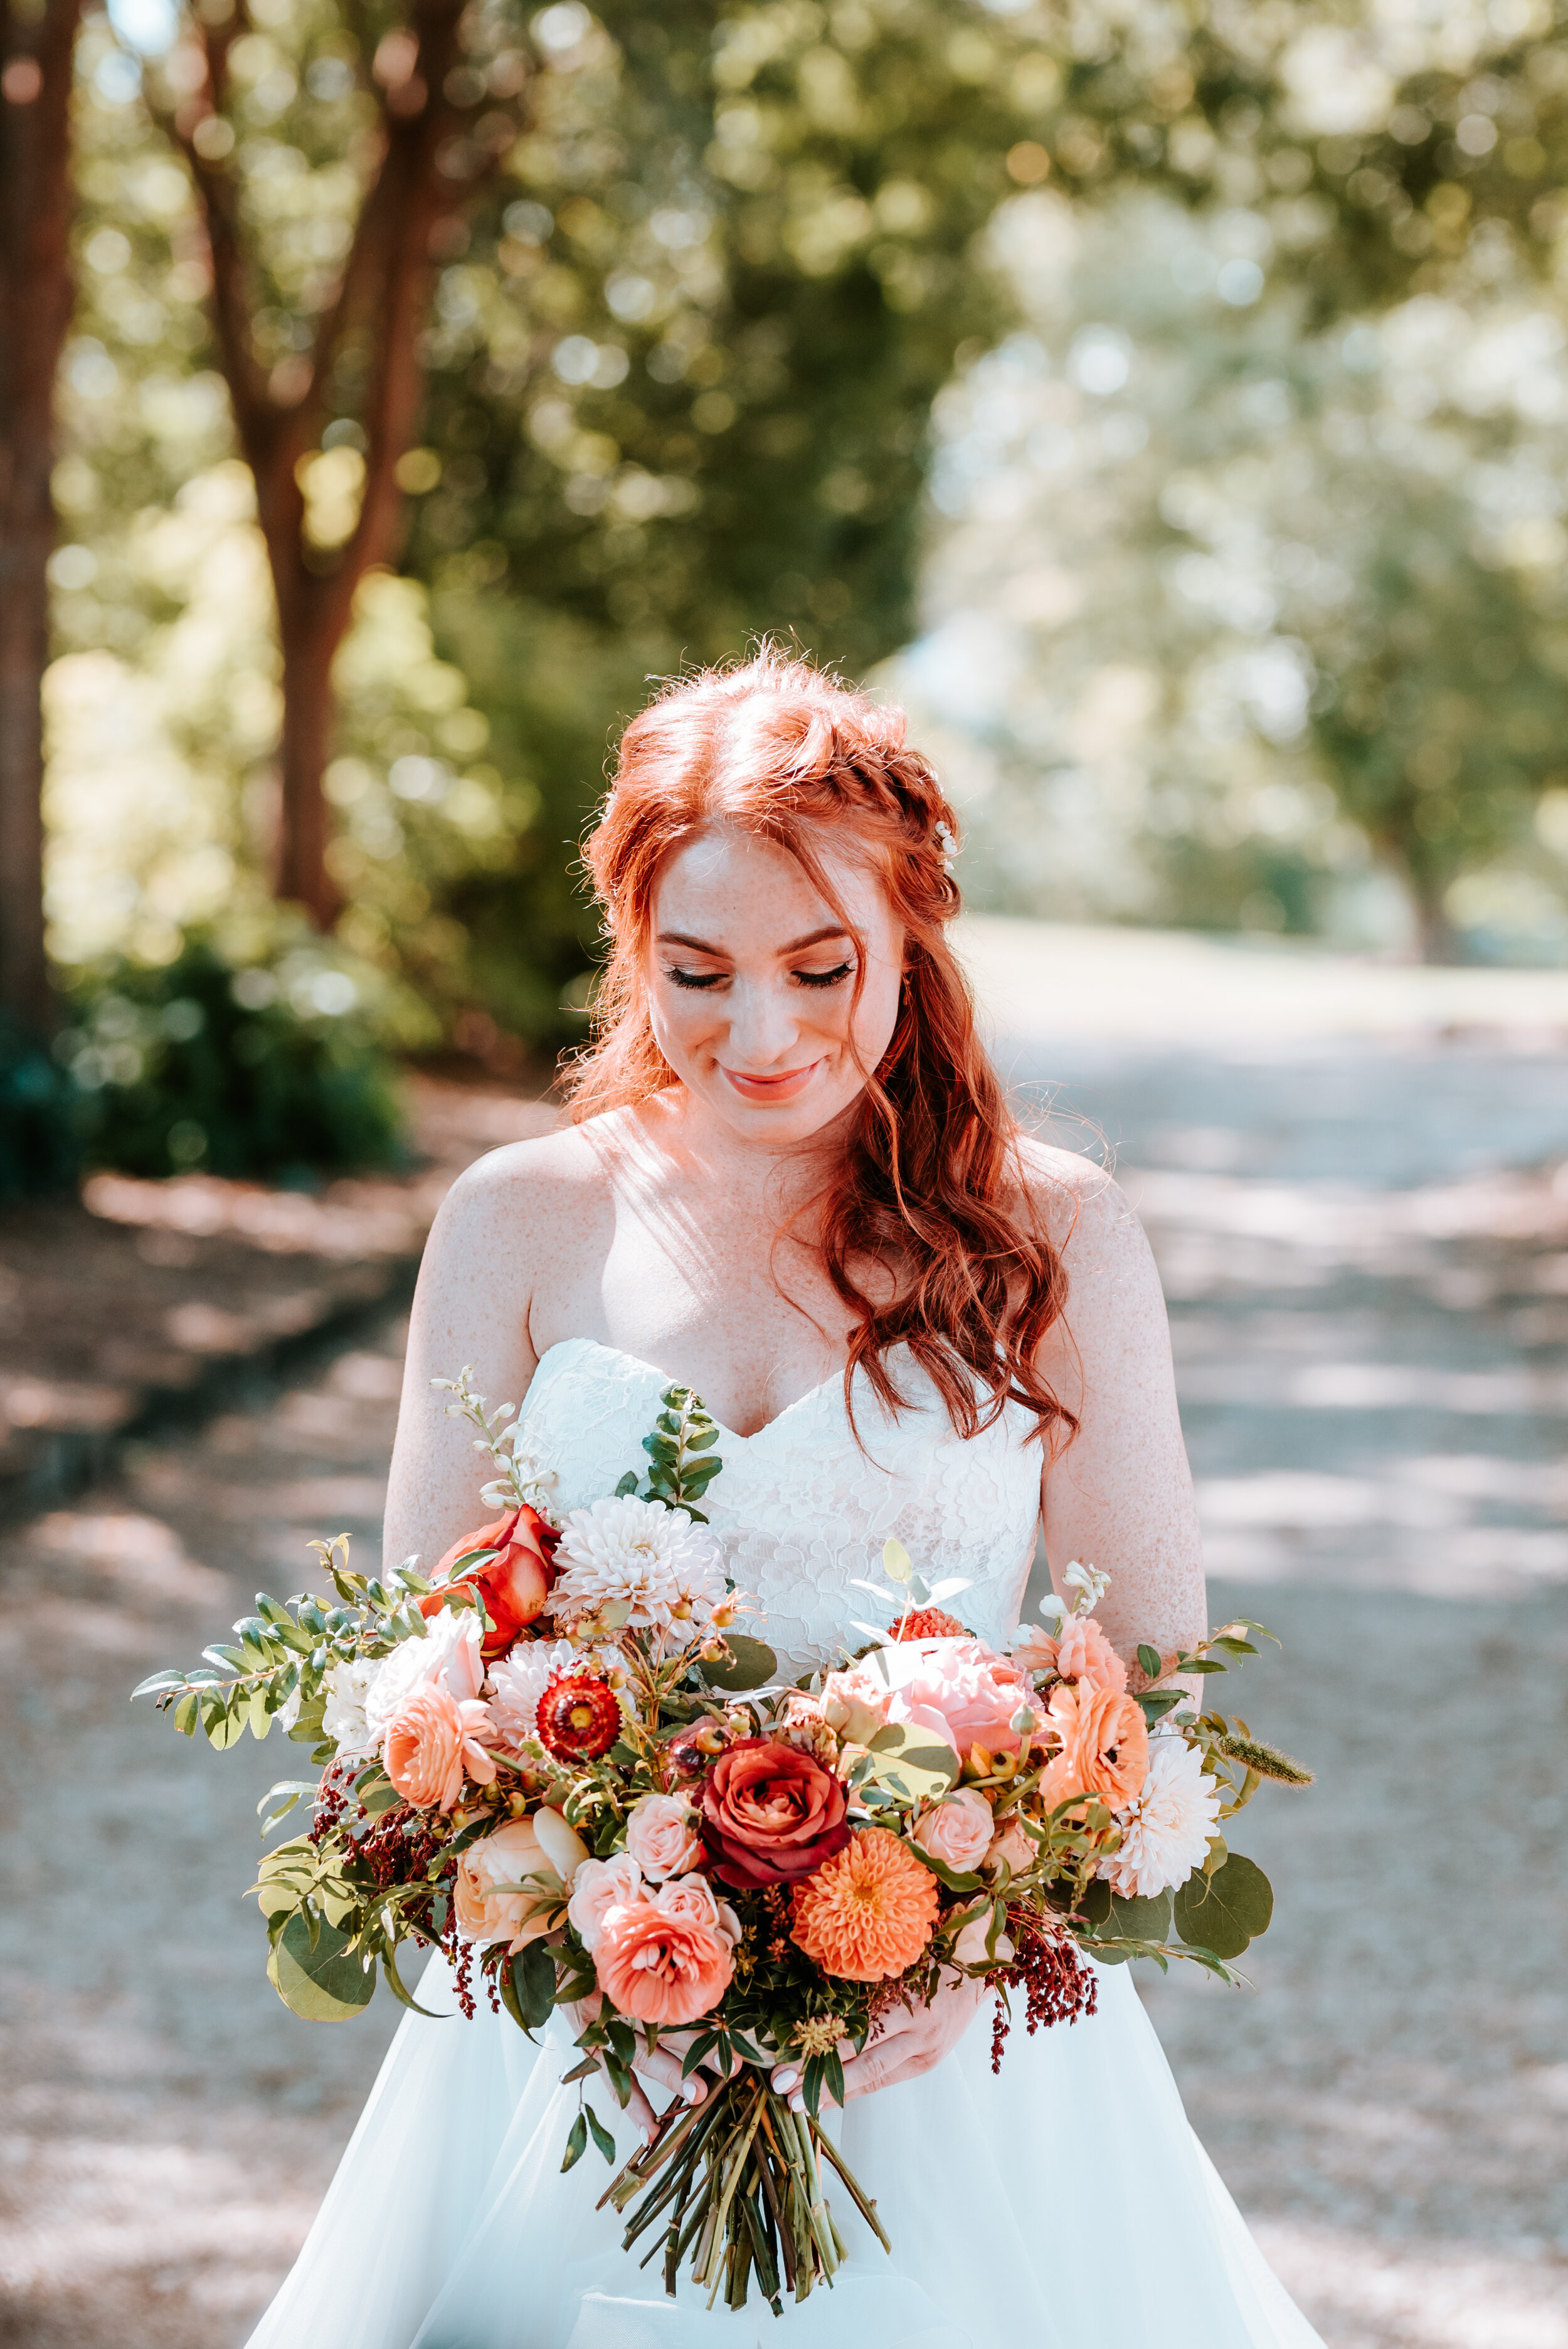 Fall bridal bouquet with garden roses, dahlias, and ranunculus in shades of burnt orange and peach, autumnal berries, and lush greenery. Nashville Wedding Floral Design.